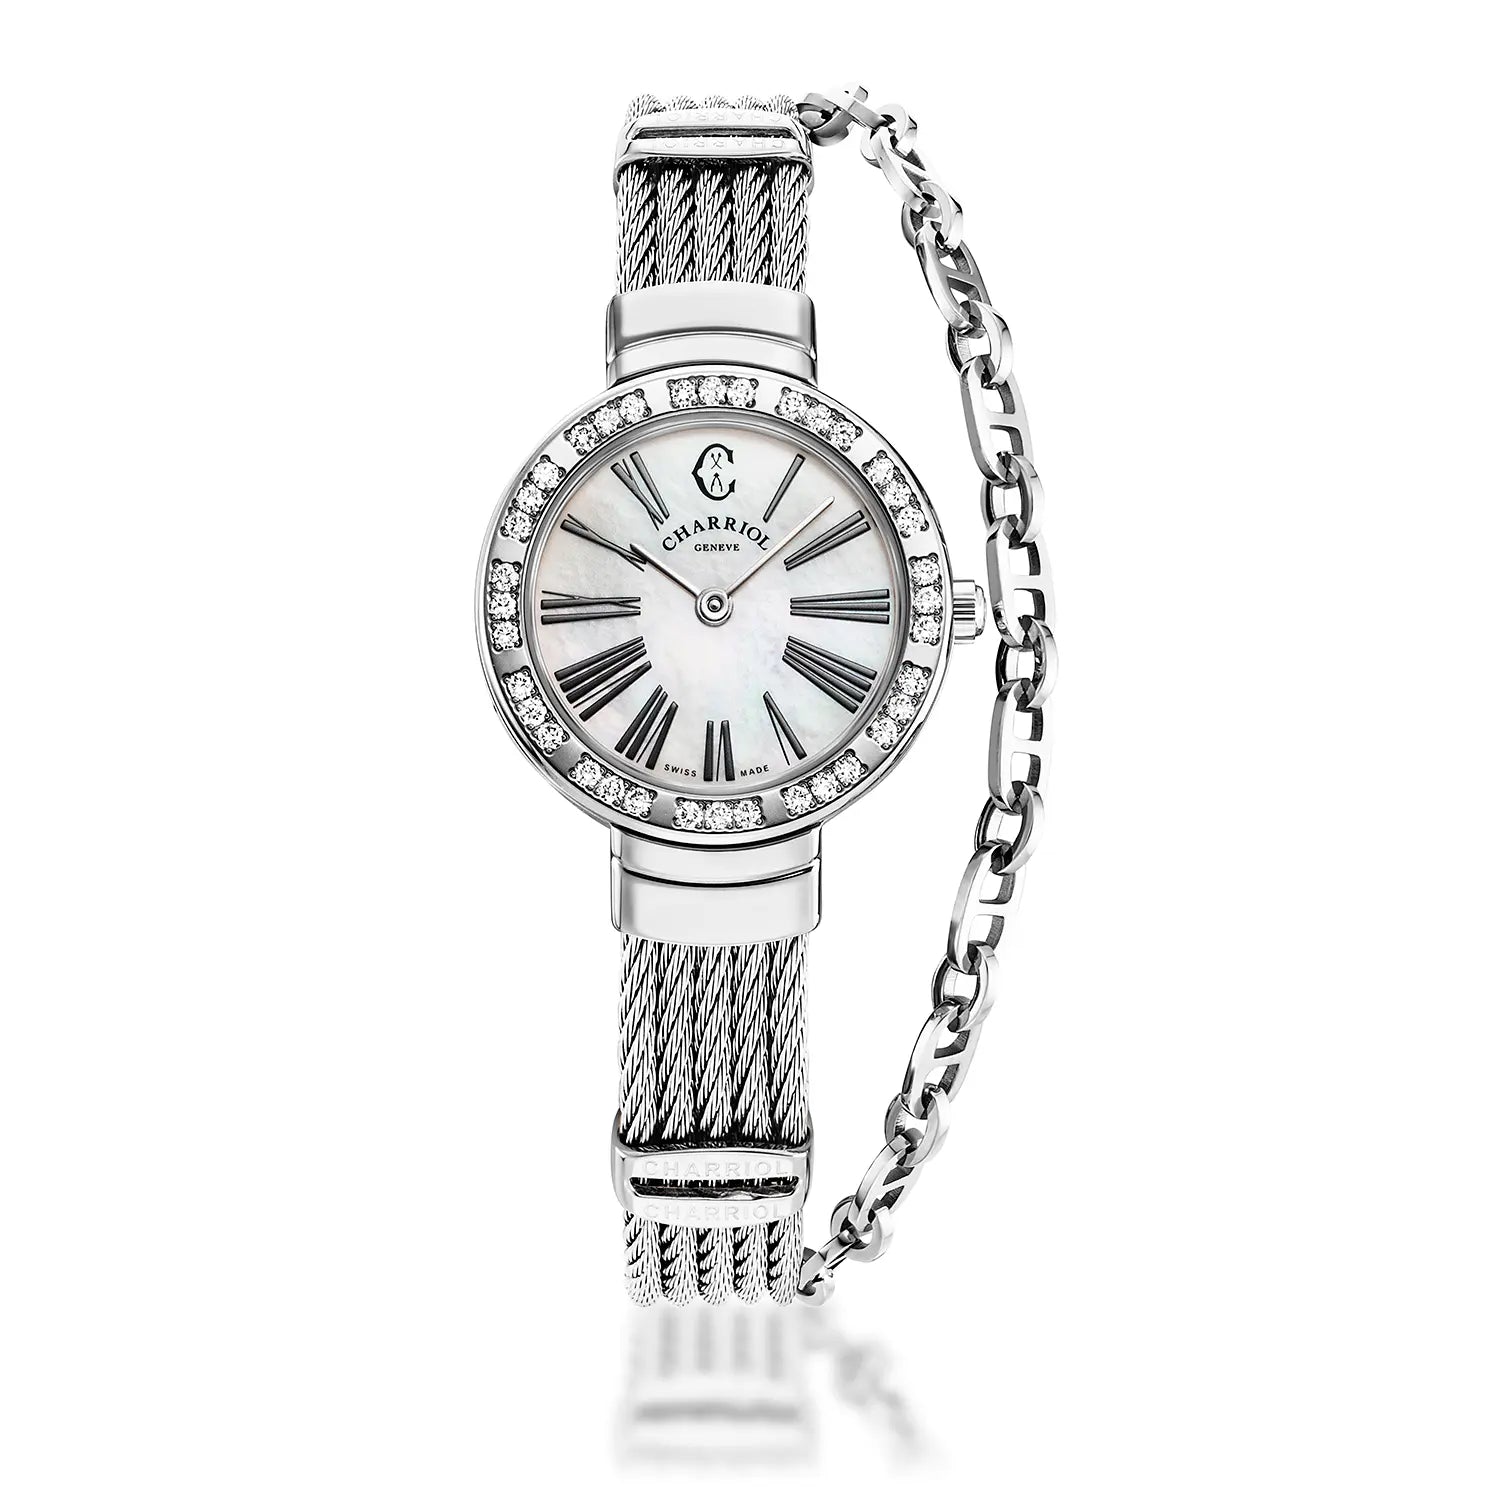 ST TROPEZ, 25MM, QUARTZ CALIBRE, WHITE MOTHER-OF-PEARL WITH ROMAN NUMERALS DIAL, STEEL WITH 36 DIAMONDS BEZEL, STEEL CABLE BRACELET - Charriol Geneve -  Watch